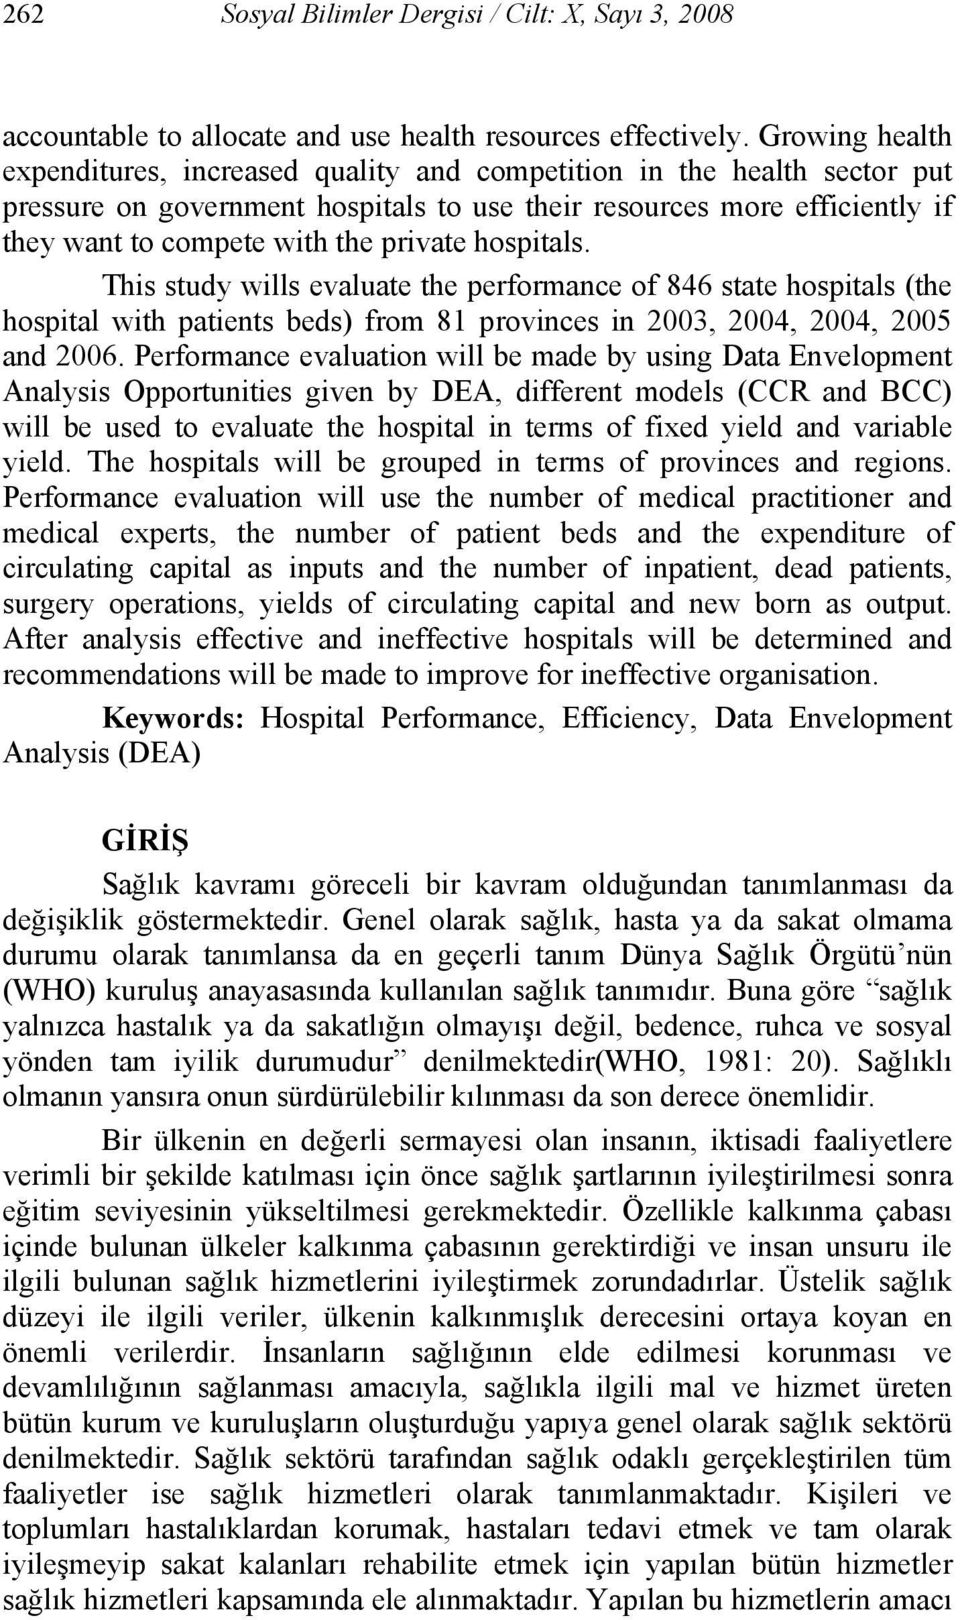 private hospitals. This study wills evaluate the performance of 846 state hospitals (the hospital with patients beds) from 81 provinces in 2003, 2004, 2004, 2005 and 2006.